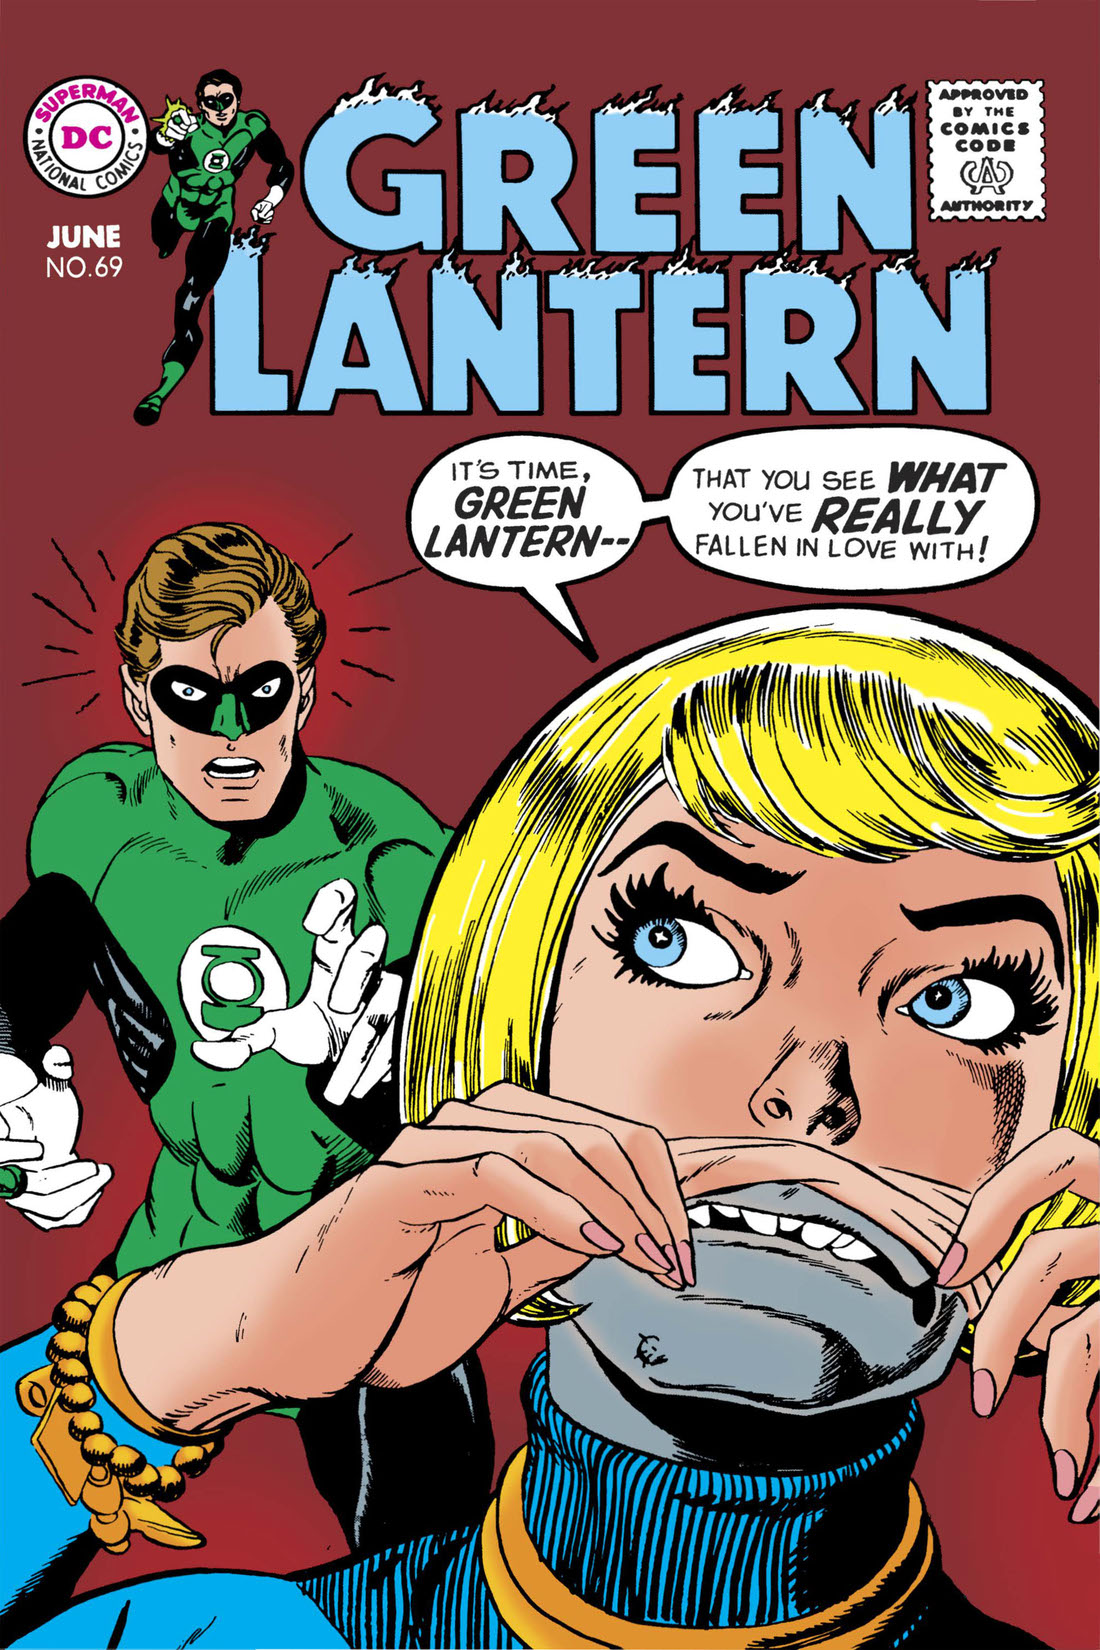 Green Lantern (1960-) #69 preview images